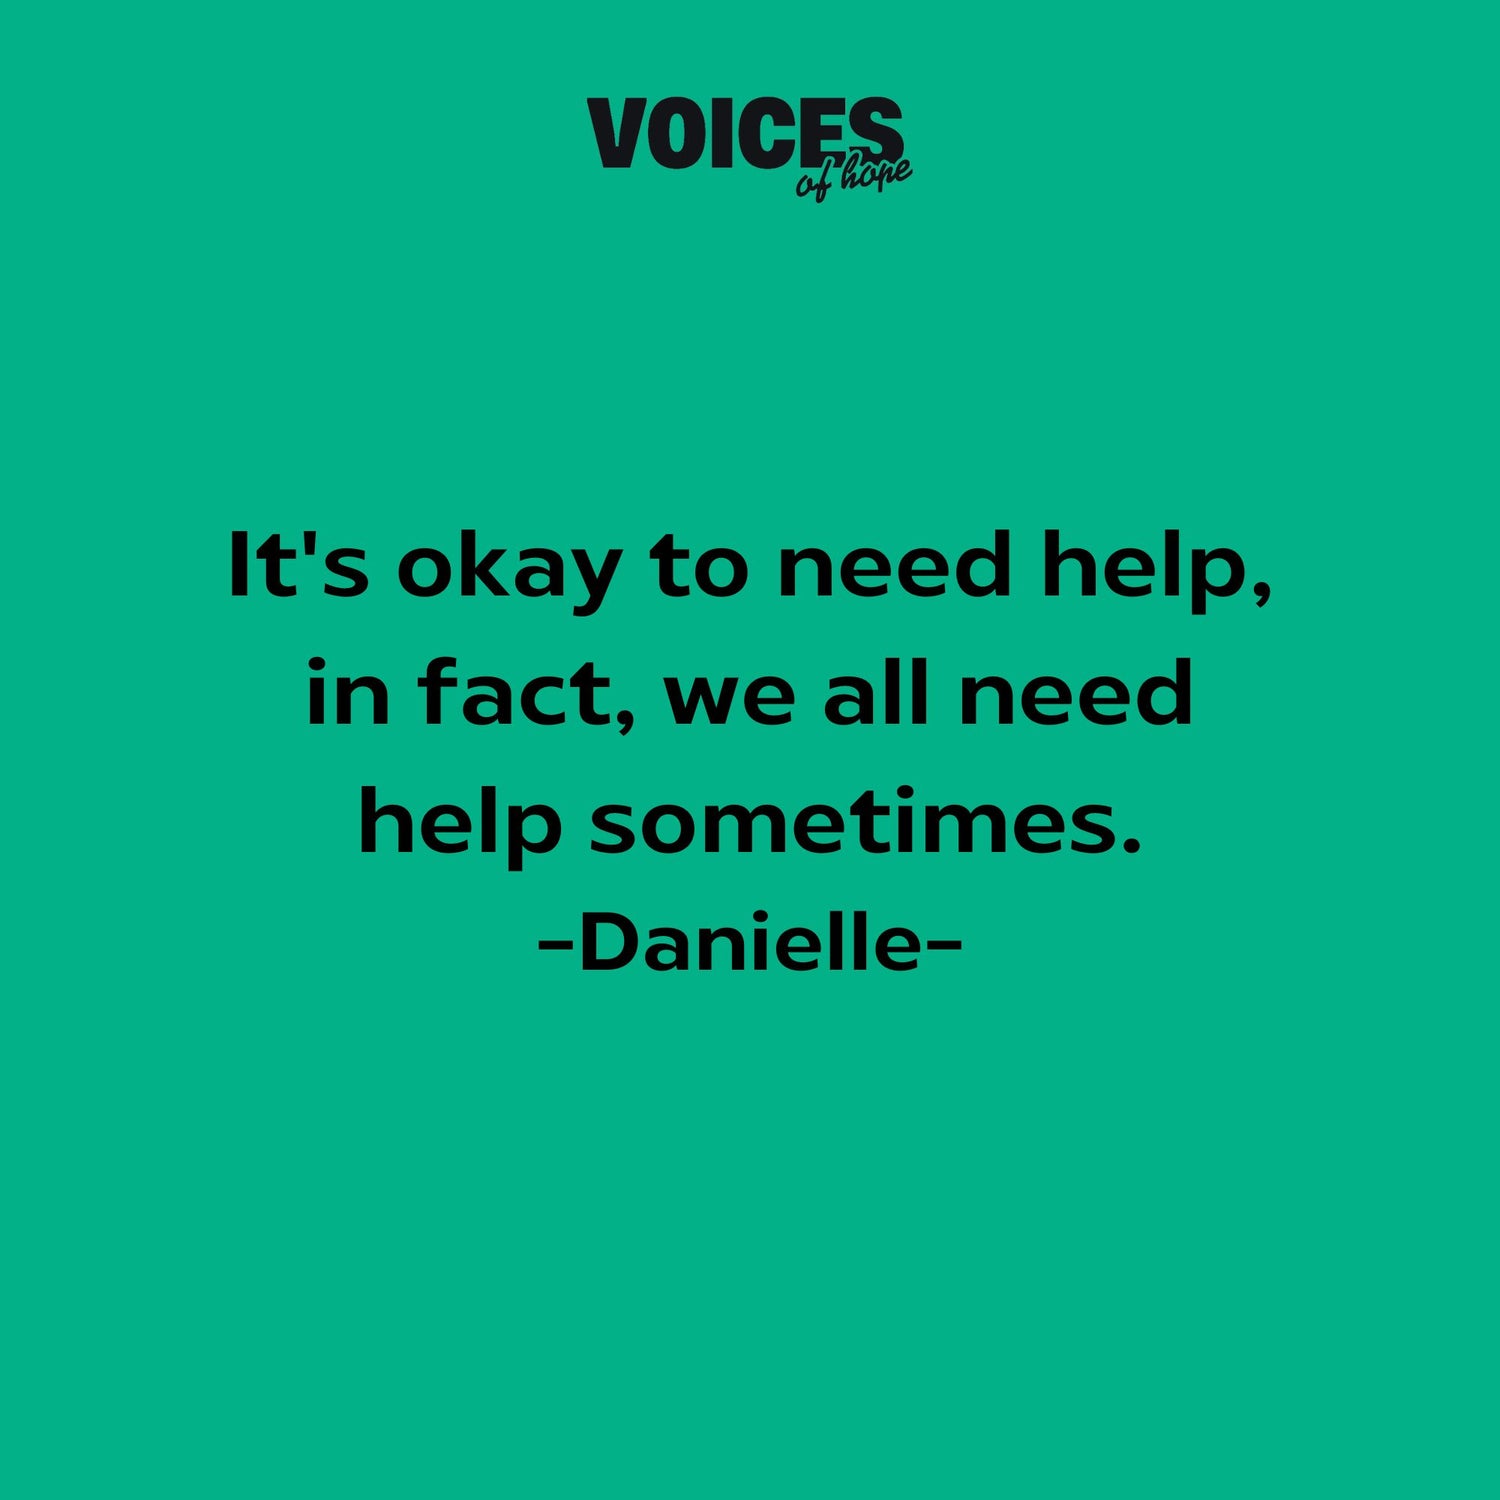 Green background with black writing that reads: "it's okay to need help, in fact, we all need help sometimes. Danielle."